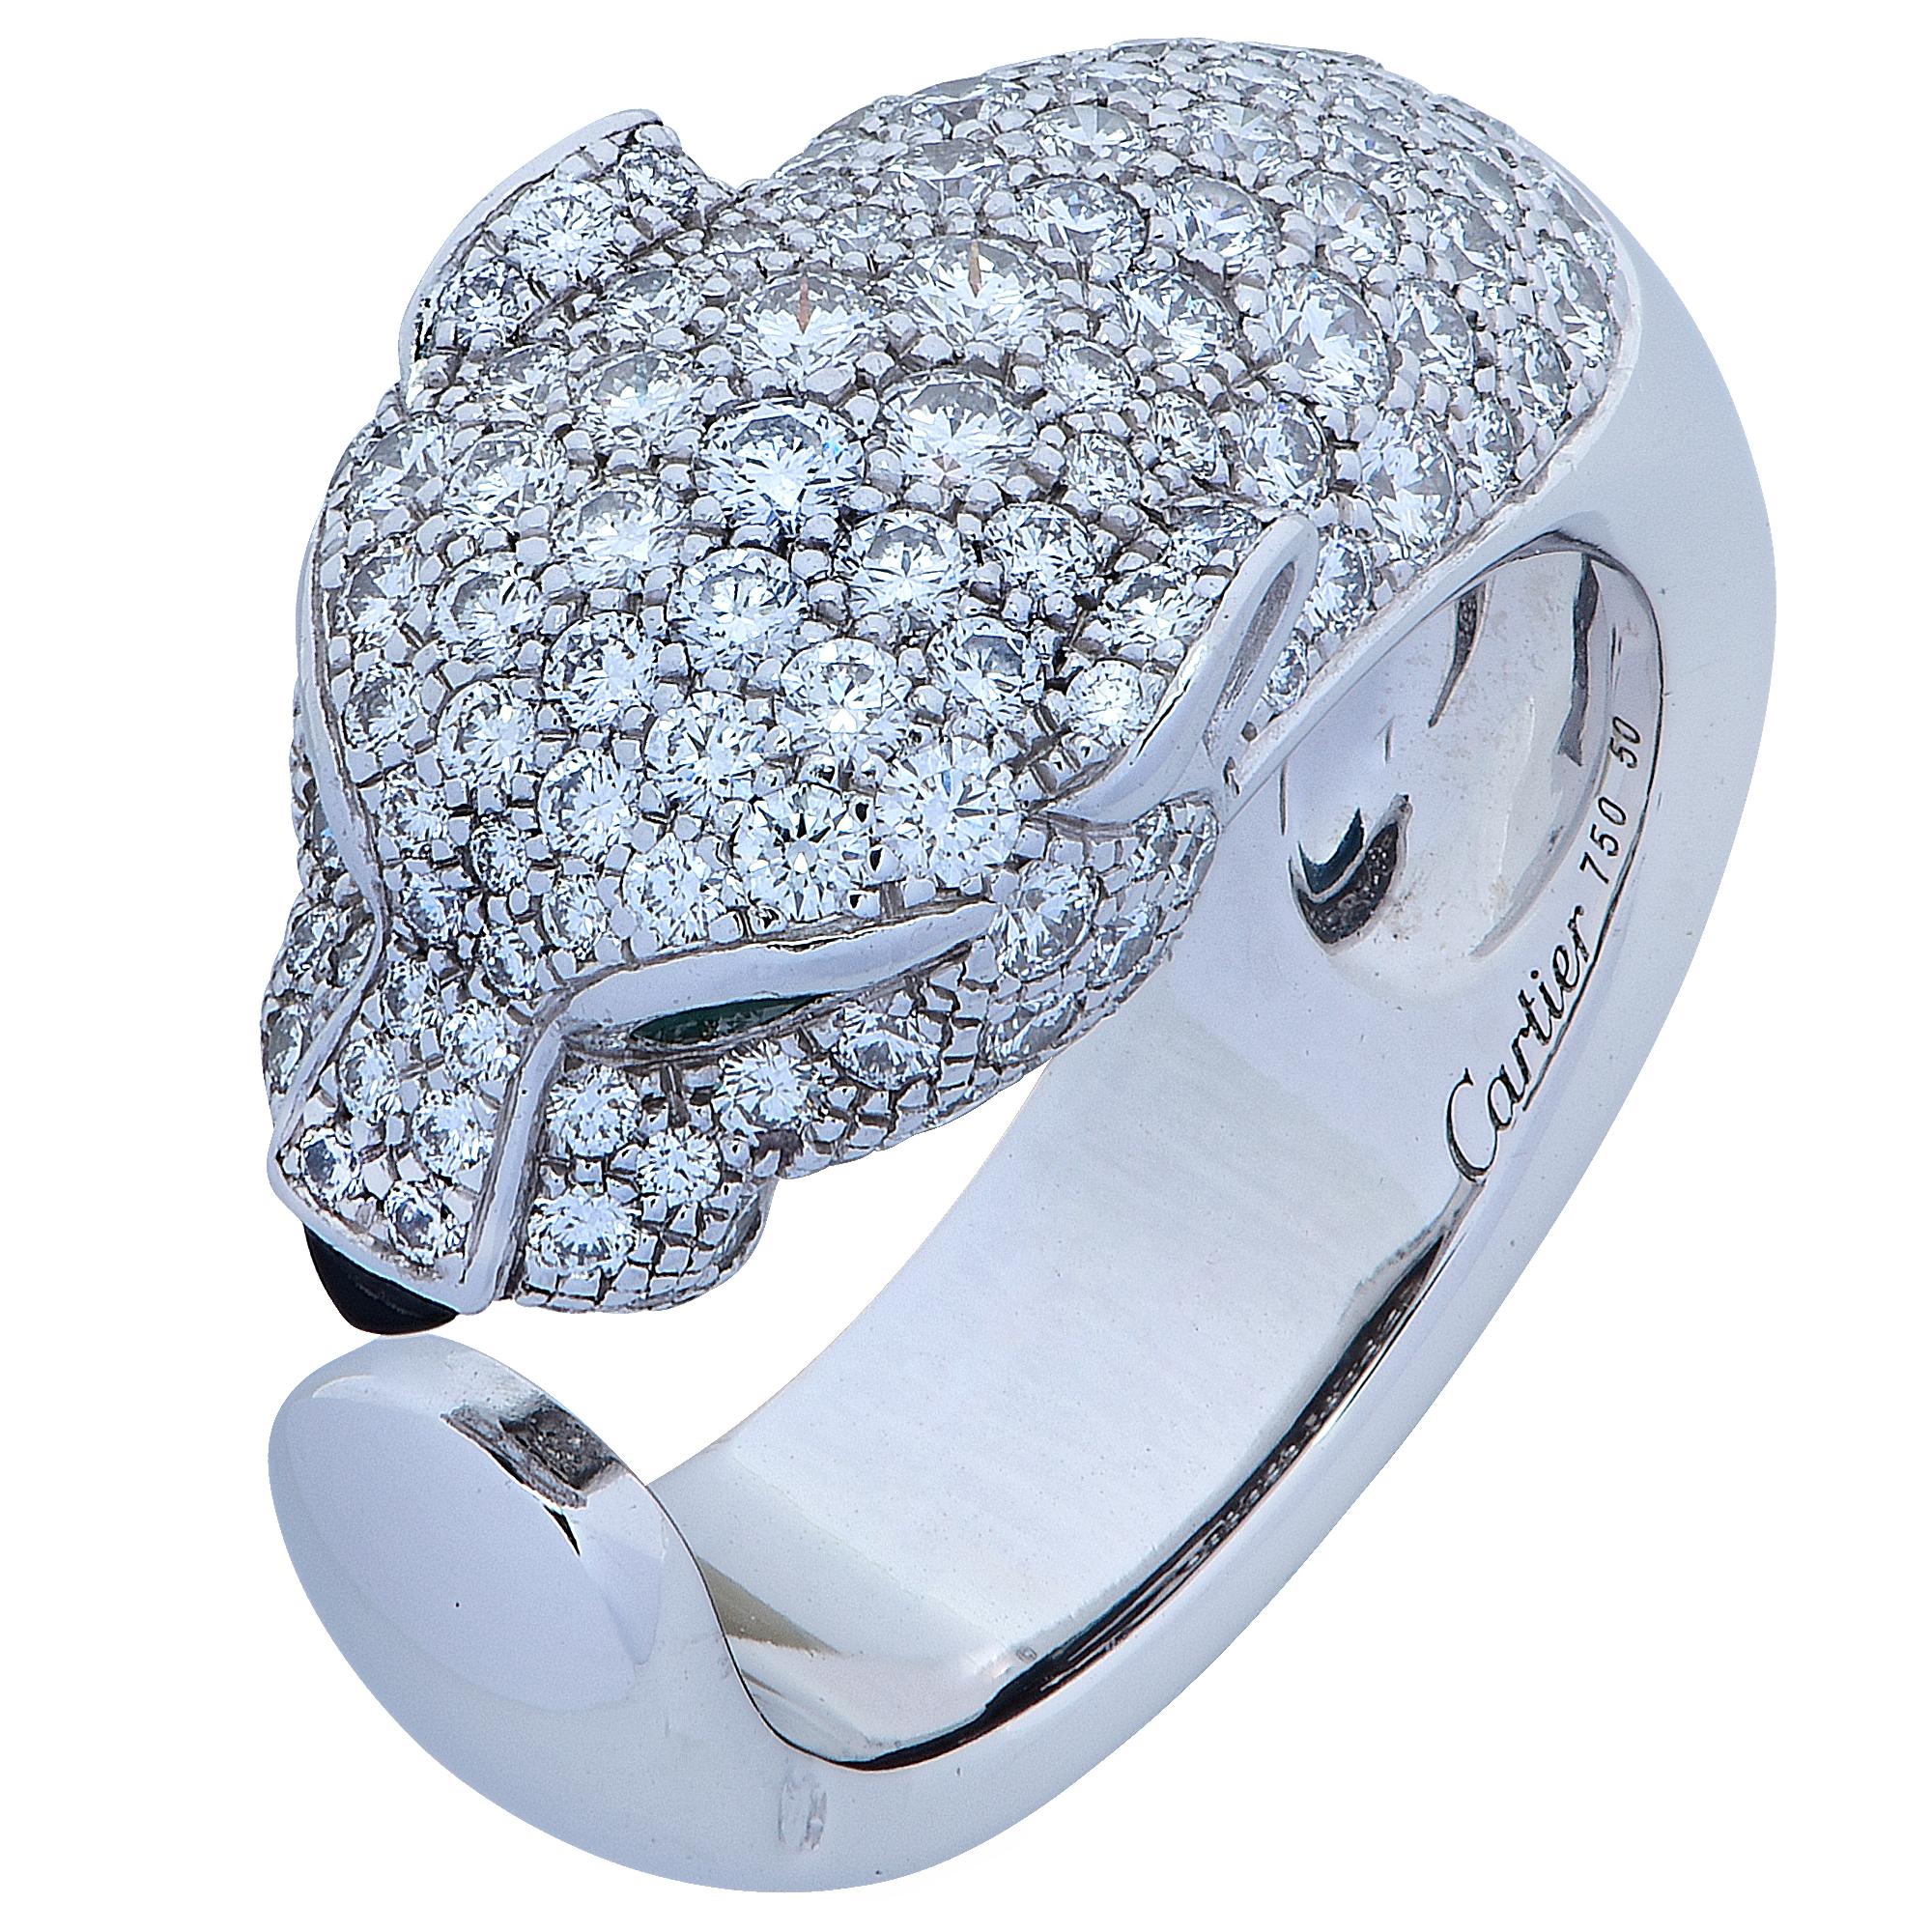 Stunning Panthere de Cartier ring, crafted in 18 karat white gold, encrusted with 137 diamonds weighing 1.15 carats total weight, with emerald eyes and an onyx nose. The ring, which features Cartier’s iconic panther, is a European size 50, which is